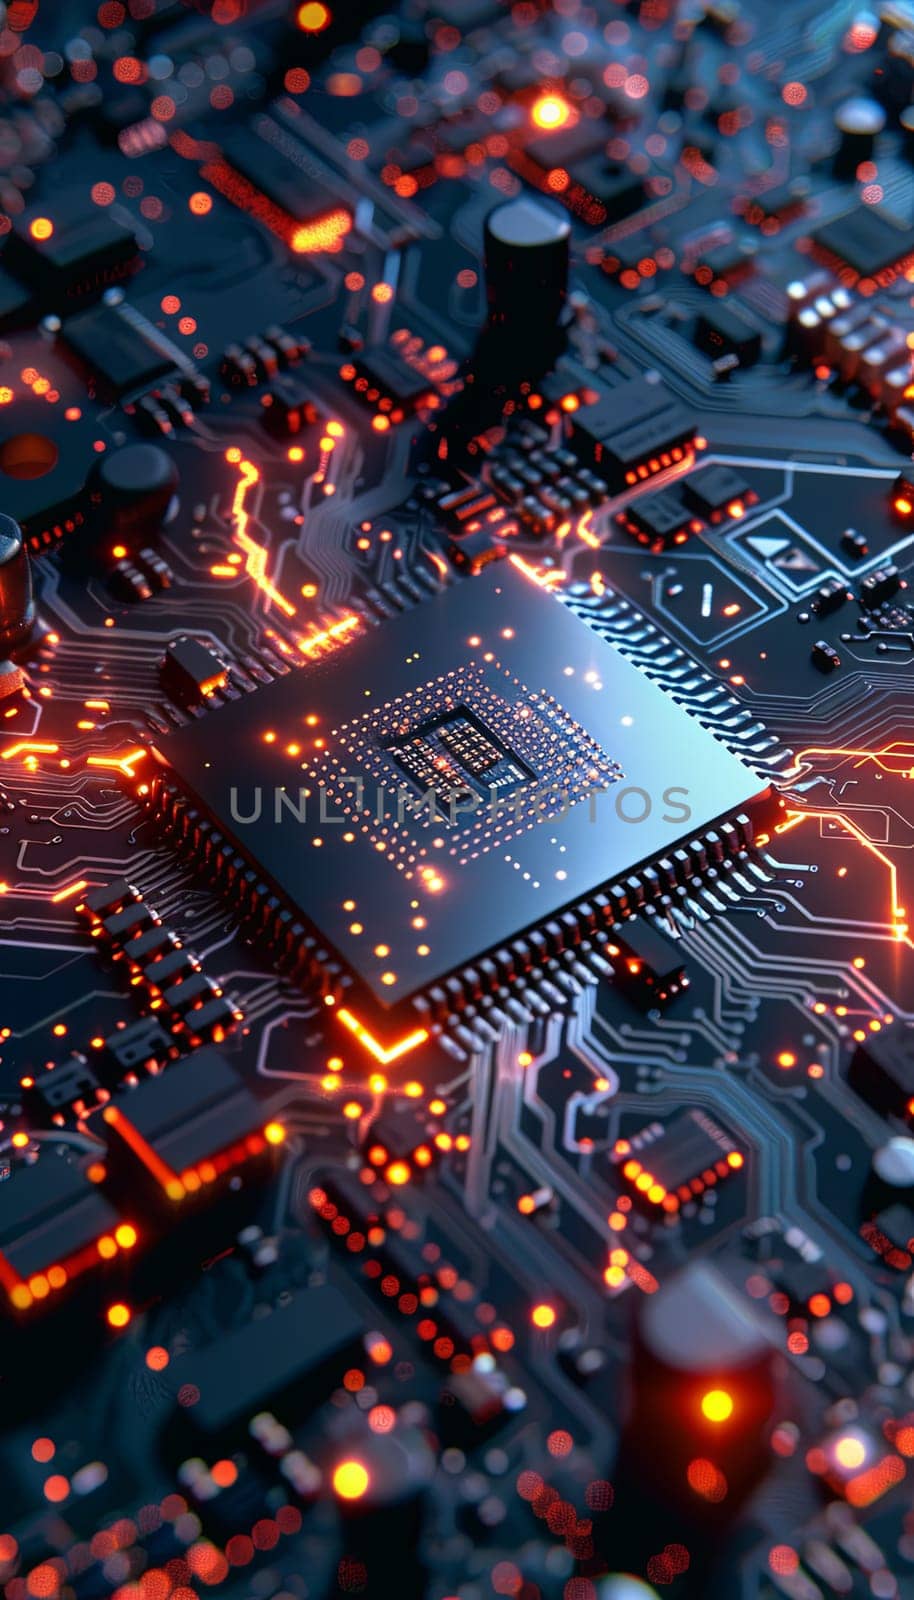 A close-up view of a modern microprocessor on a motherboard, surrounded by digital data streams and glowing light effects.